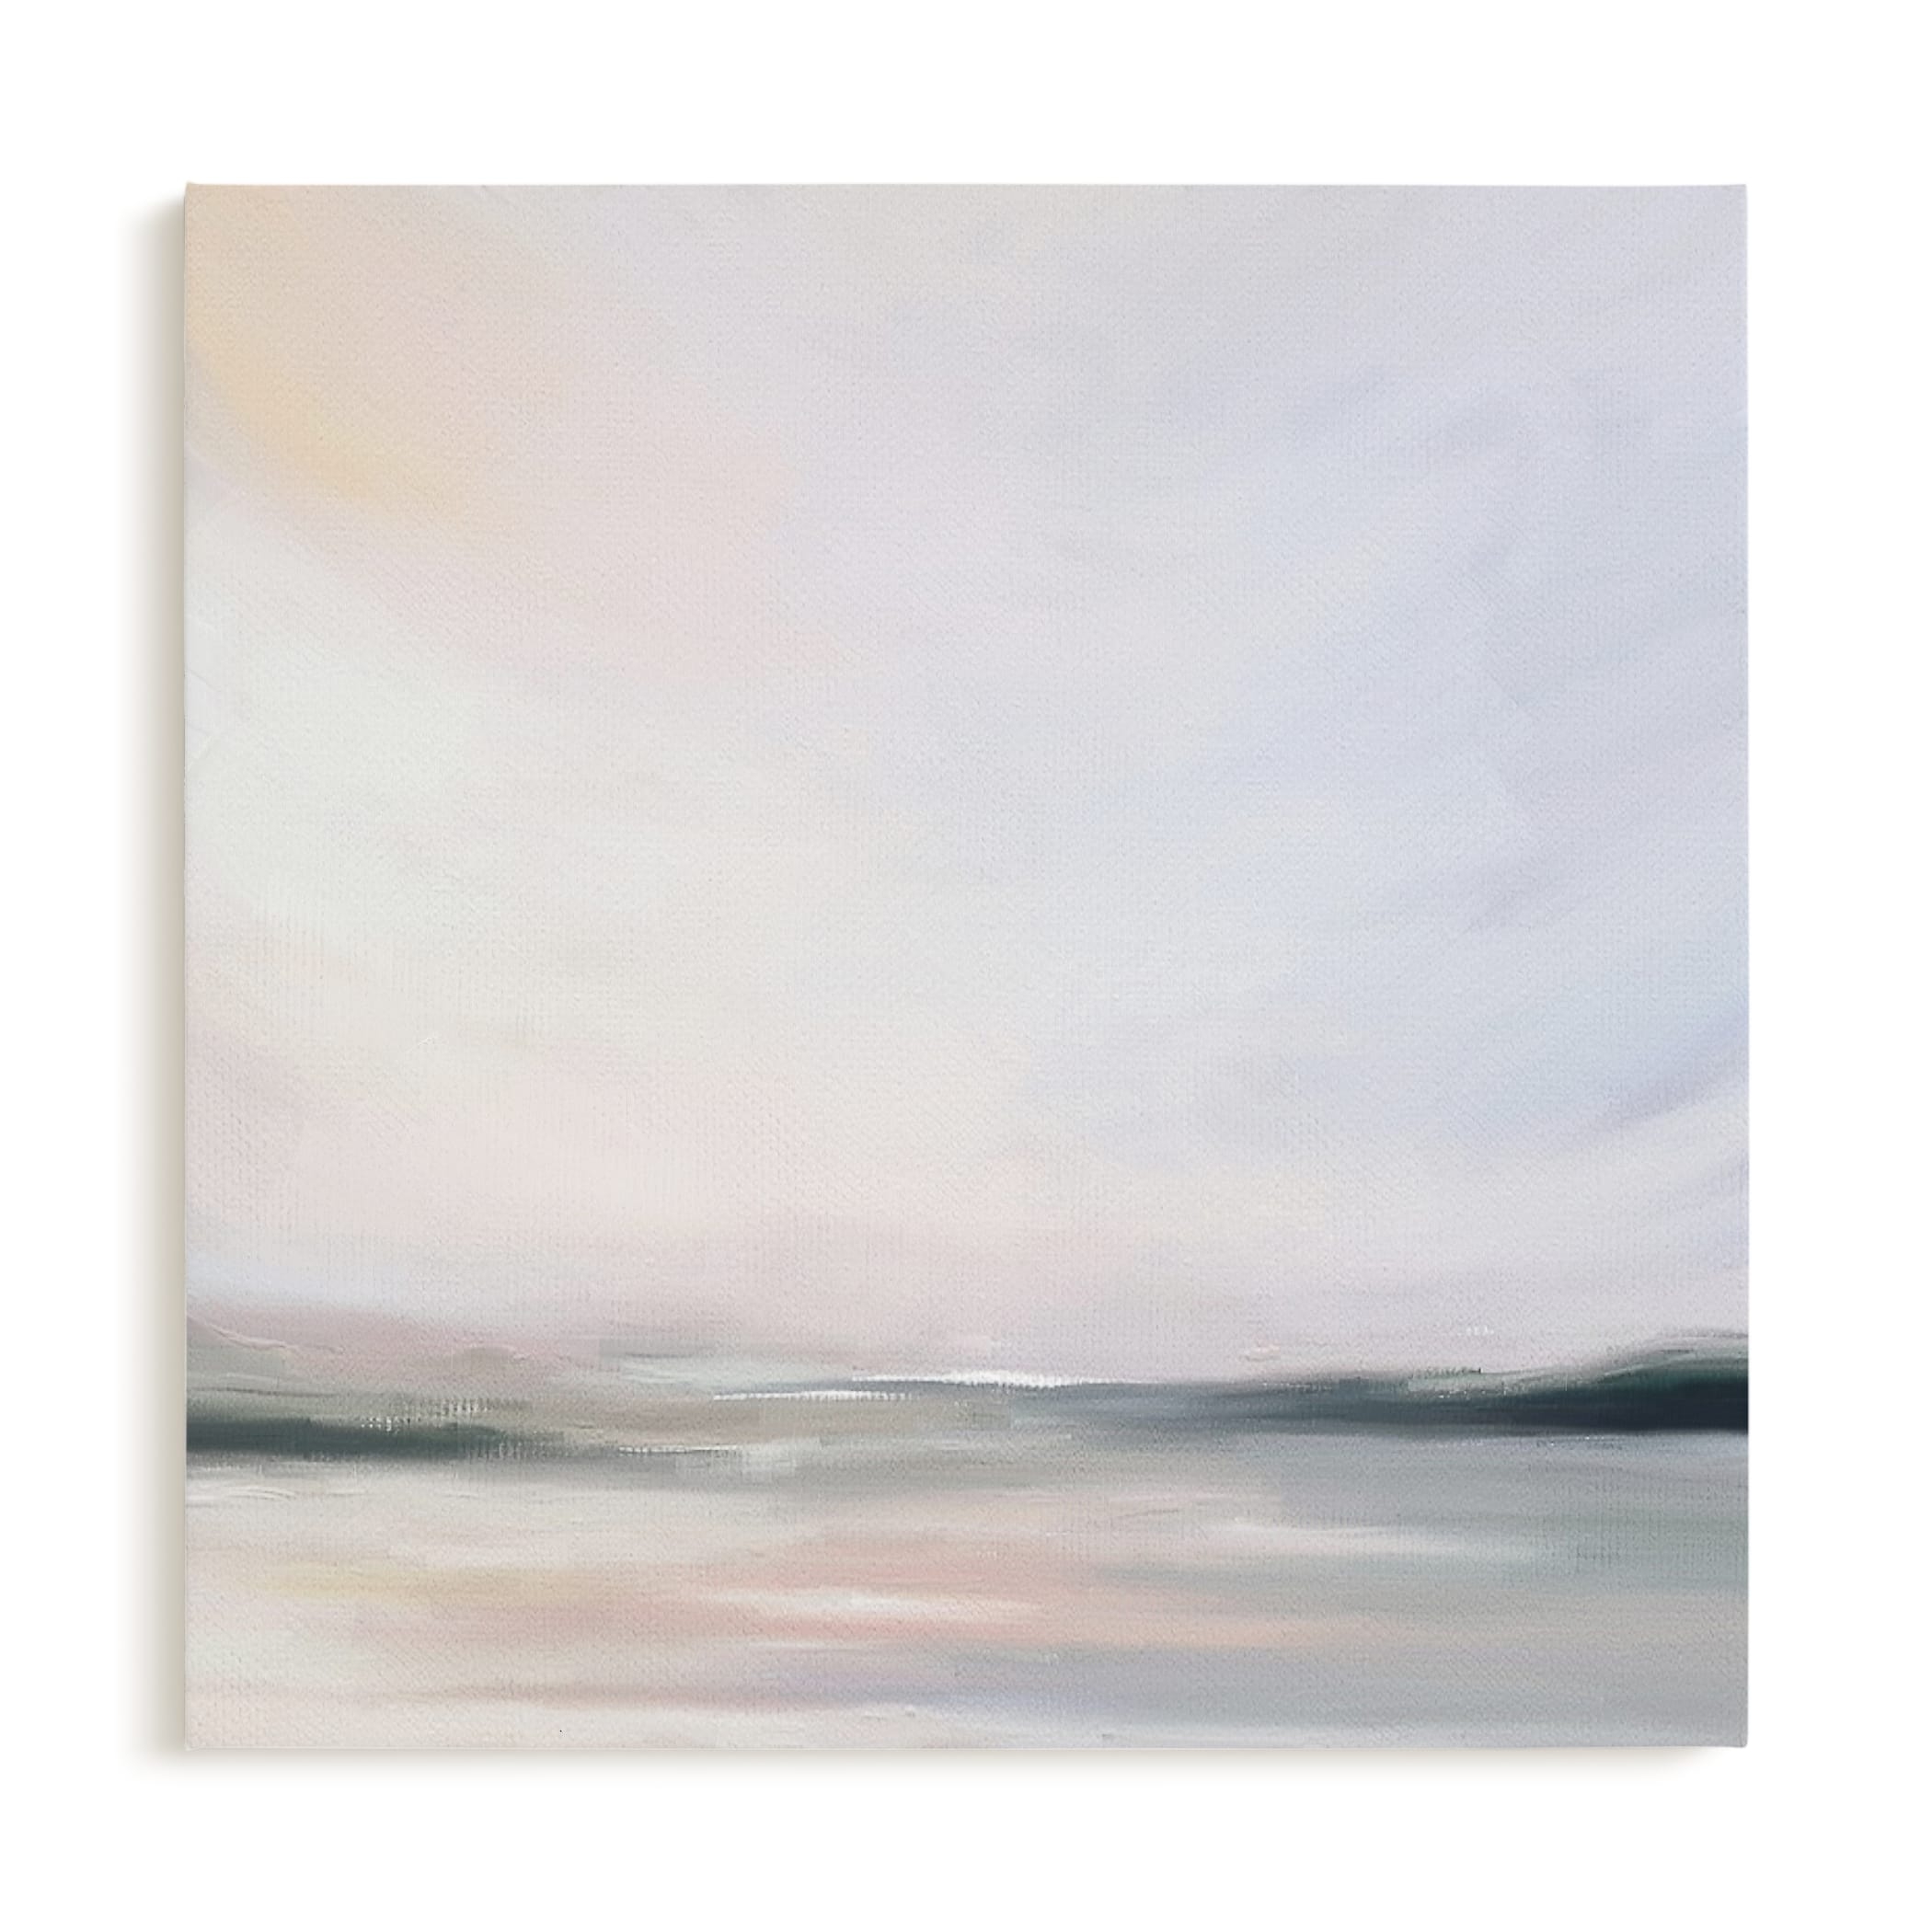 Mindful 1 Canvas- 30" sq - Image 0